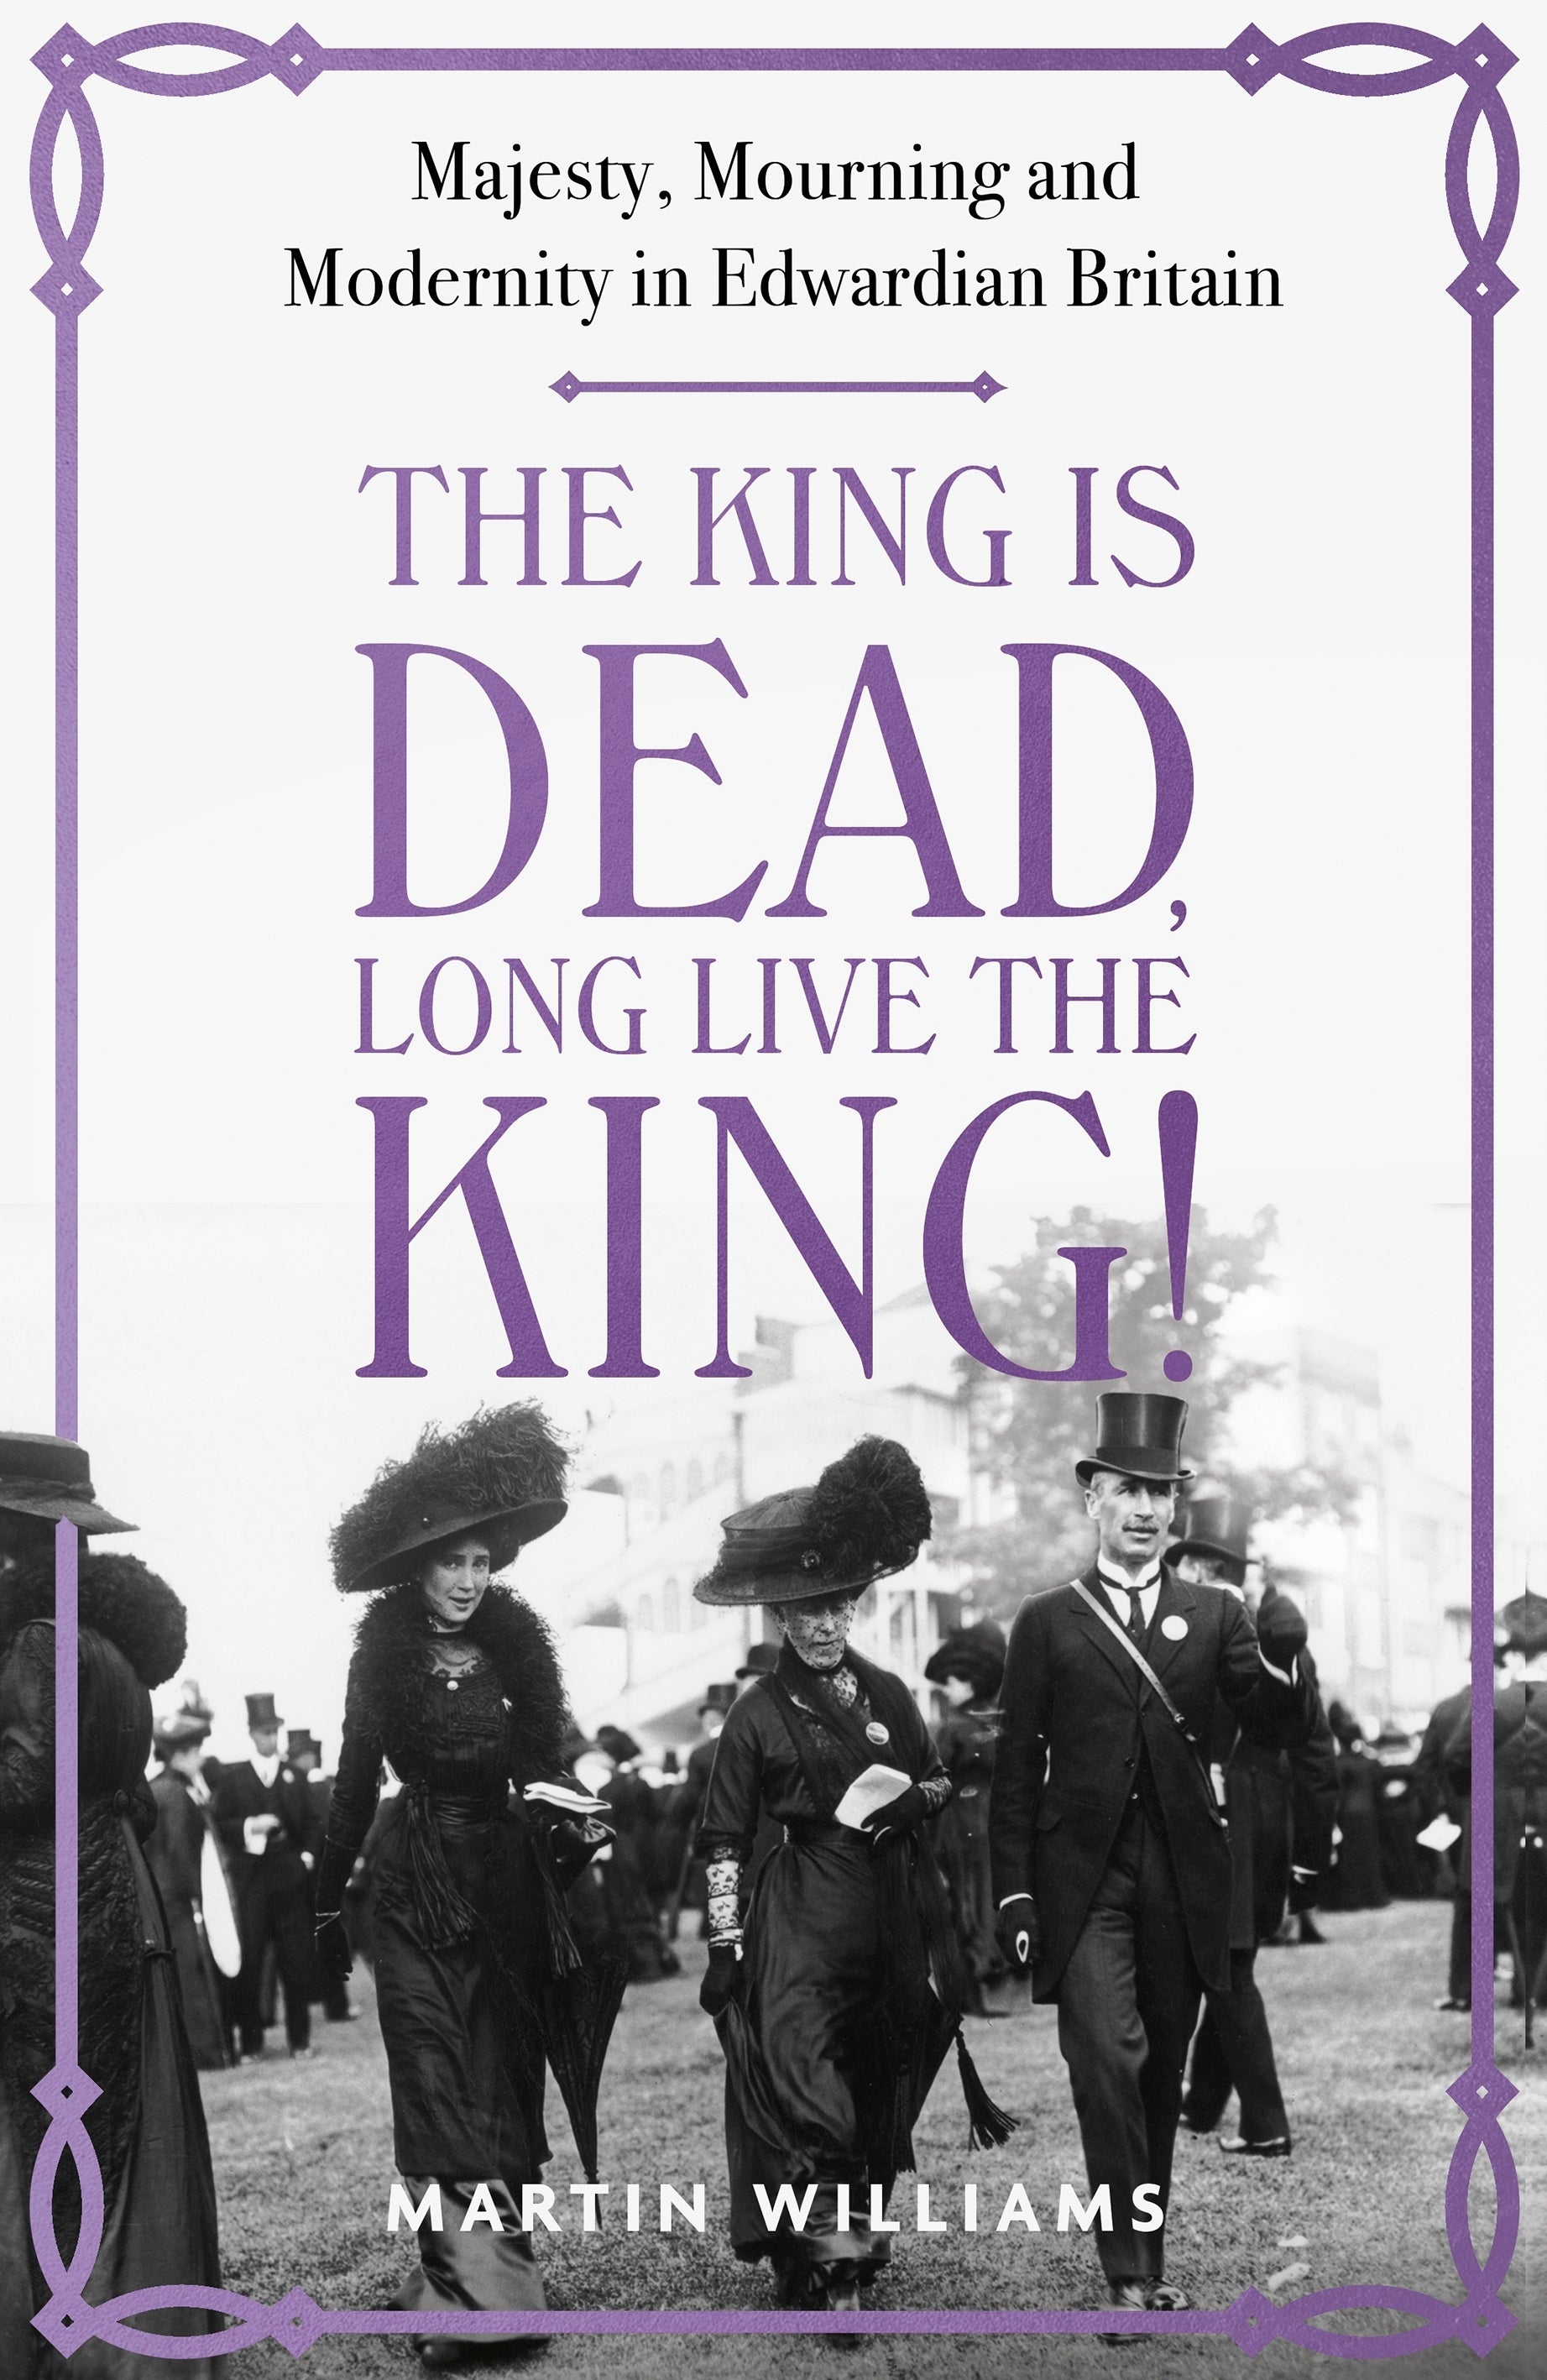 The King is Dead, Long Live the King! by Martin Williams